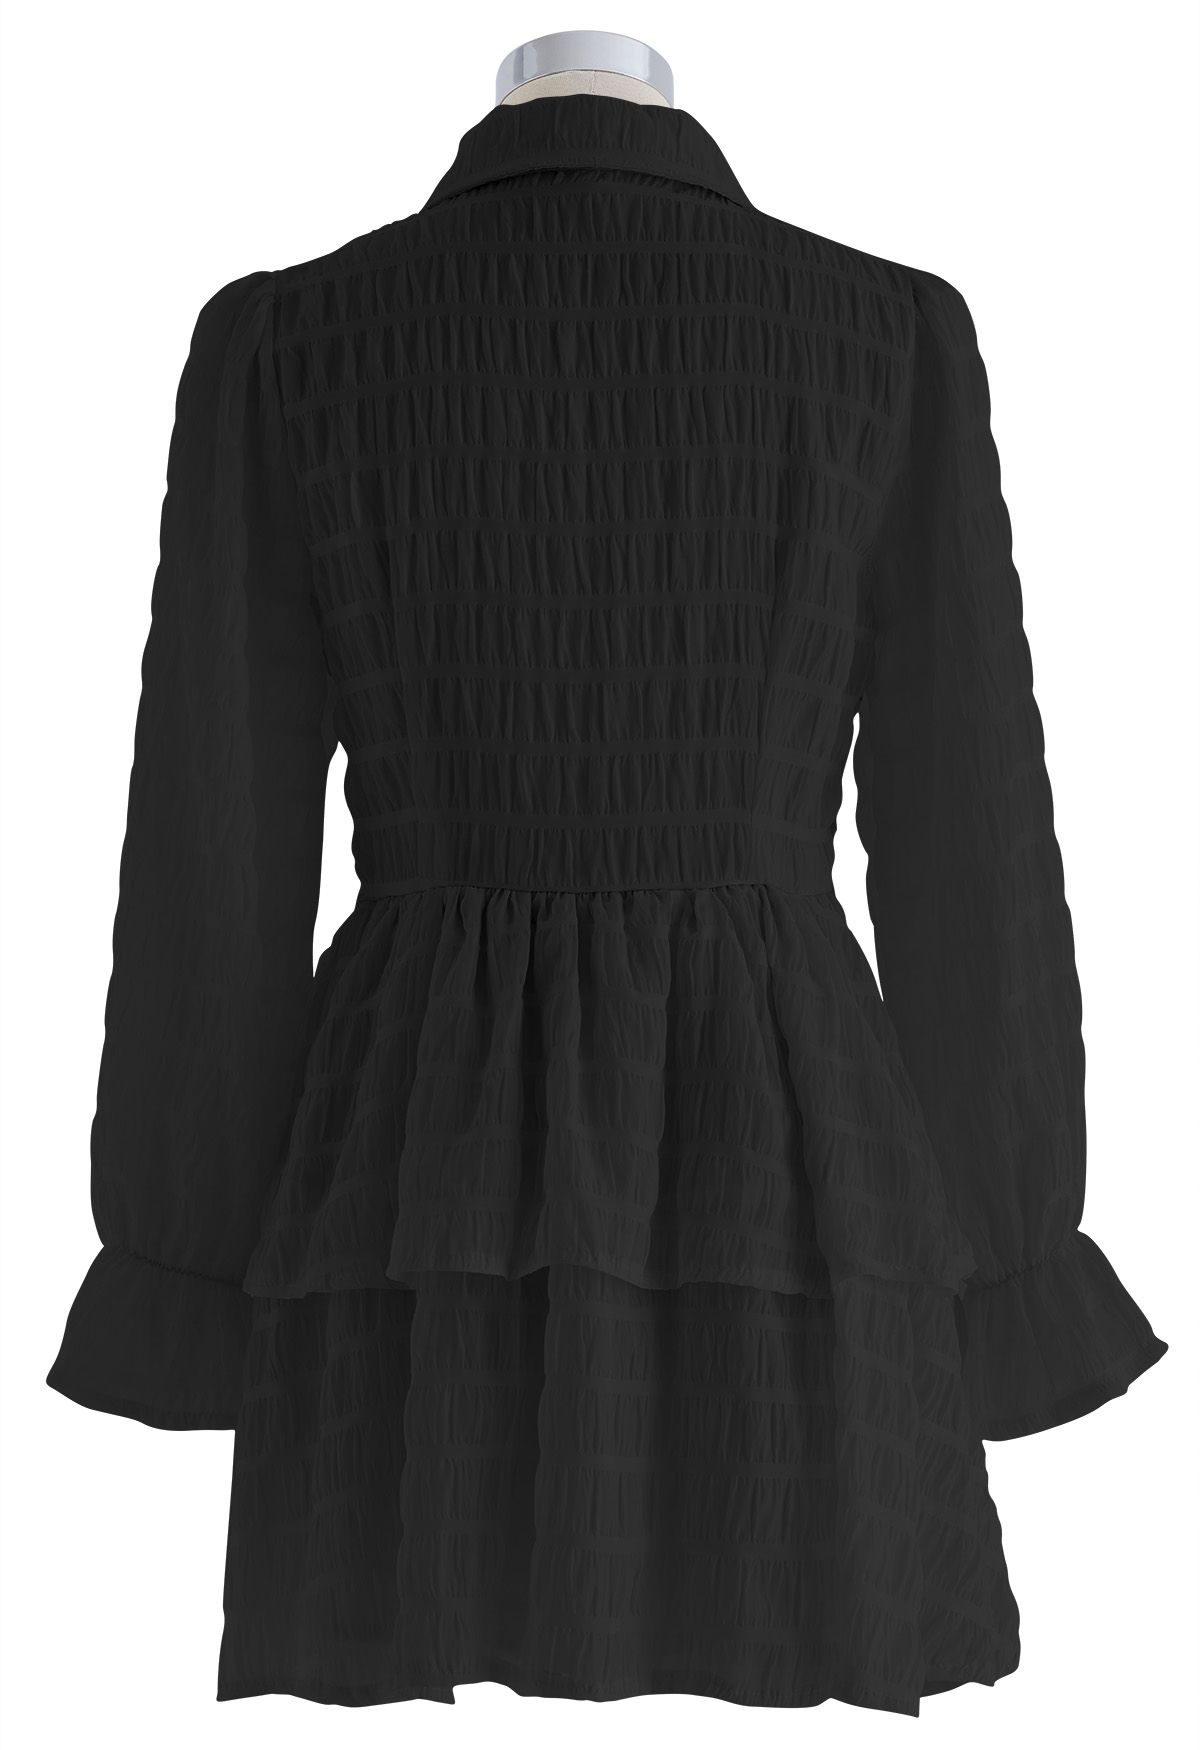 Full Shirring Tiered Mini Dress in Black - Retro, Indie and Unique Fashion